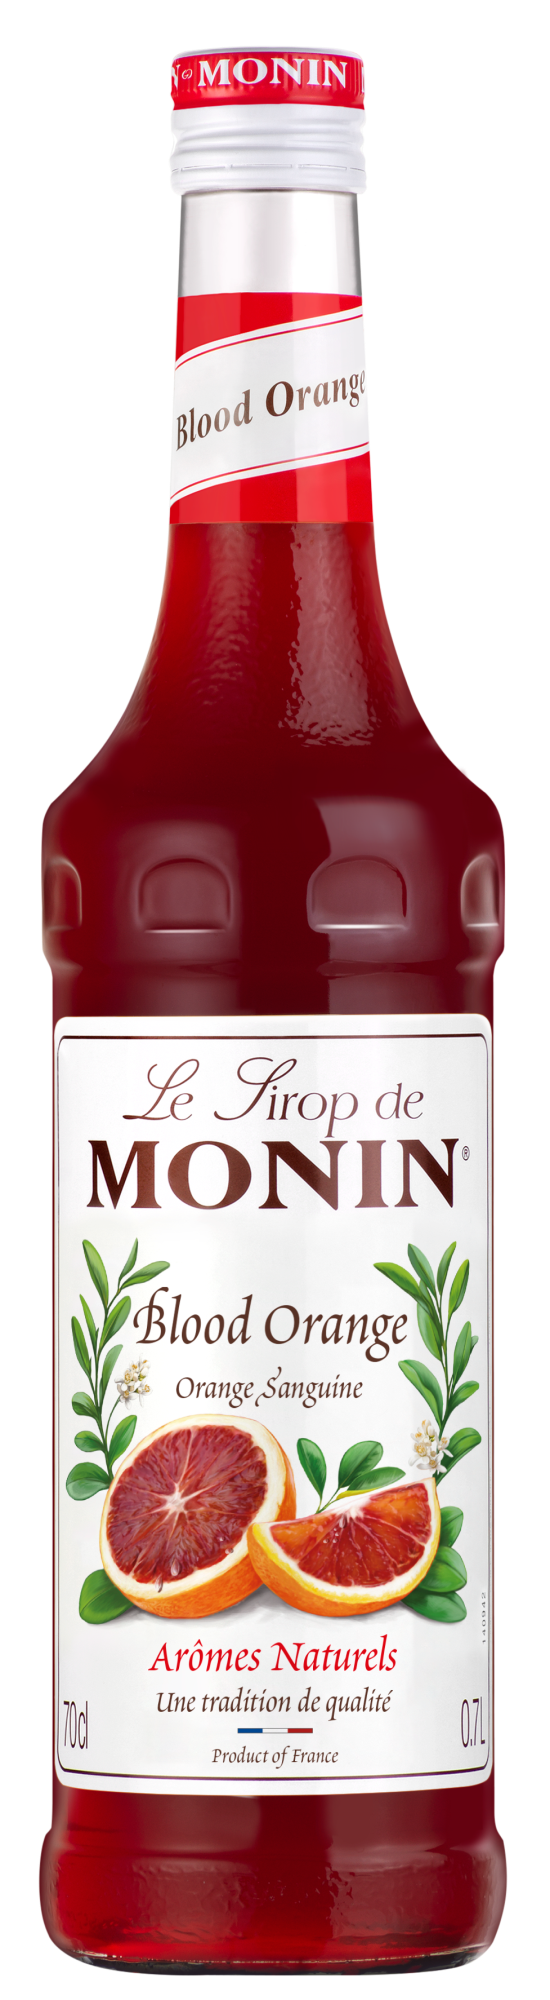 Buy MONIN Blood Orange Syrup. It has a unique balance of sweet, sour and acidity all captured in a bold red coloured syrup.